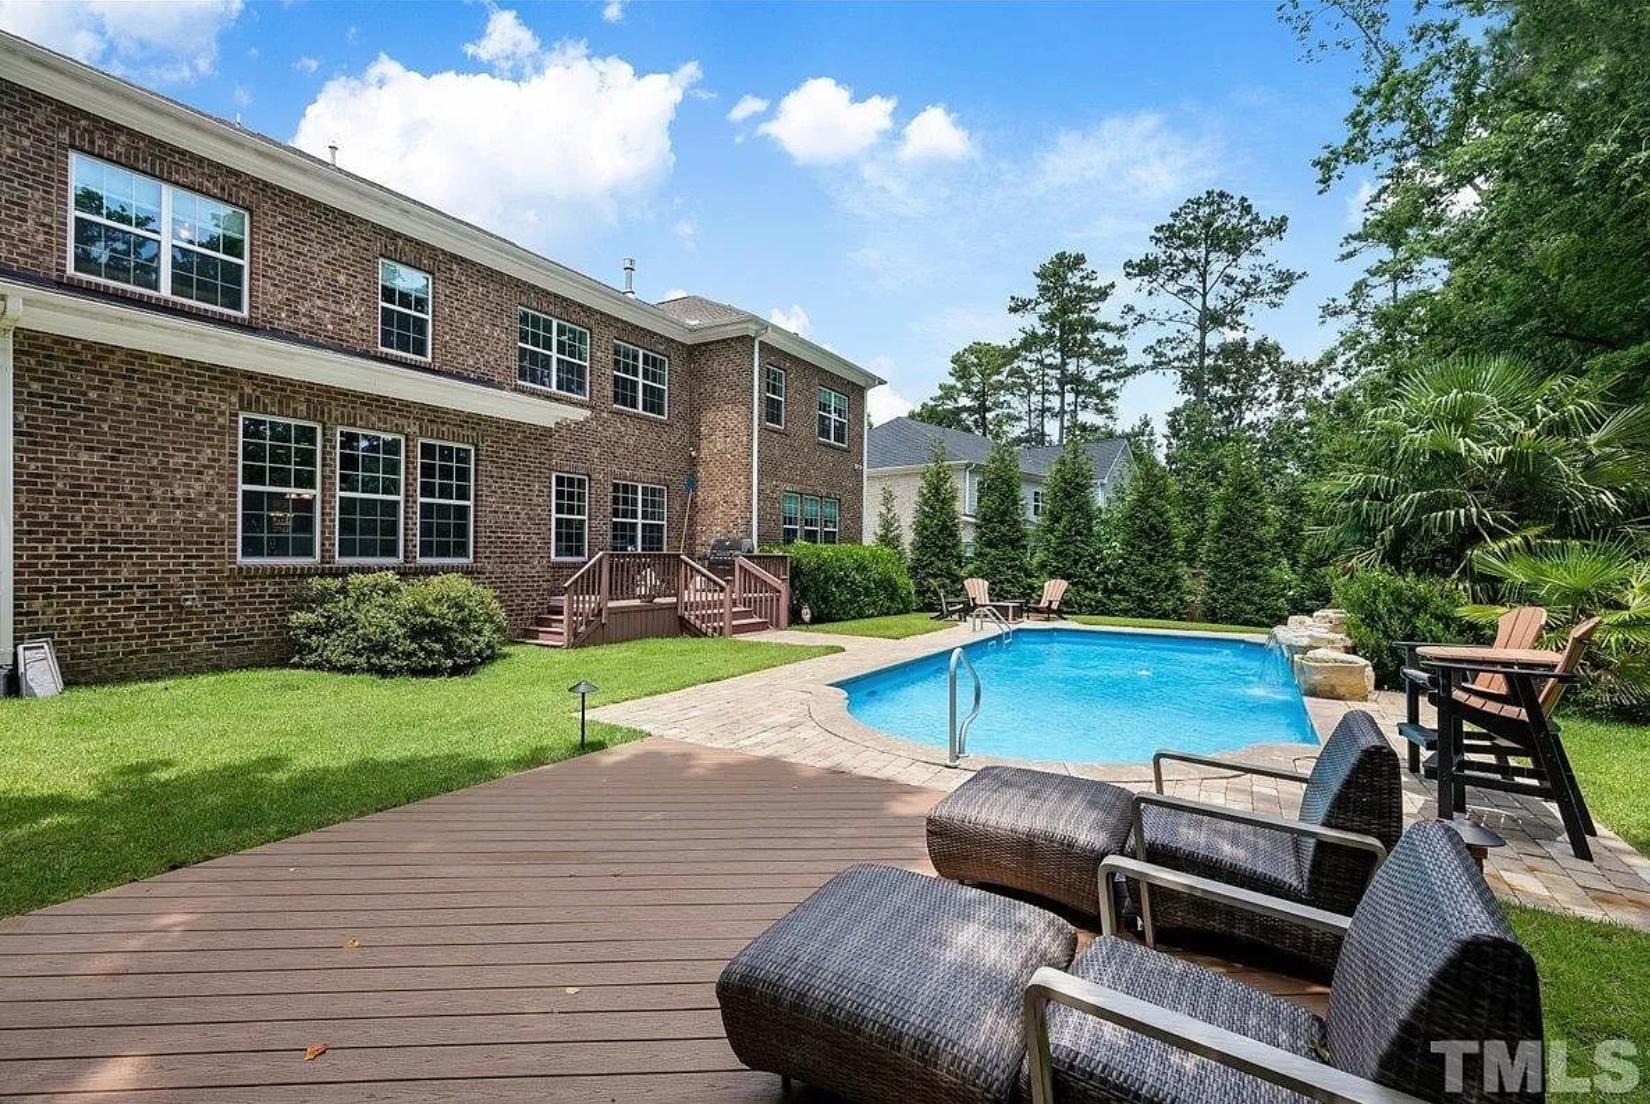 A two-story brick home with a back porch, large yard with a bright blue pool, deck area, and mature landscaping